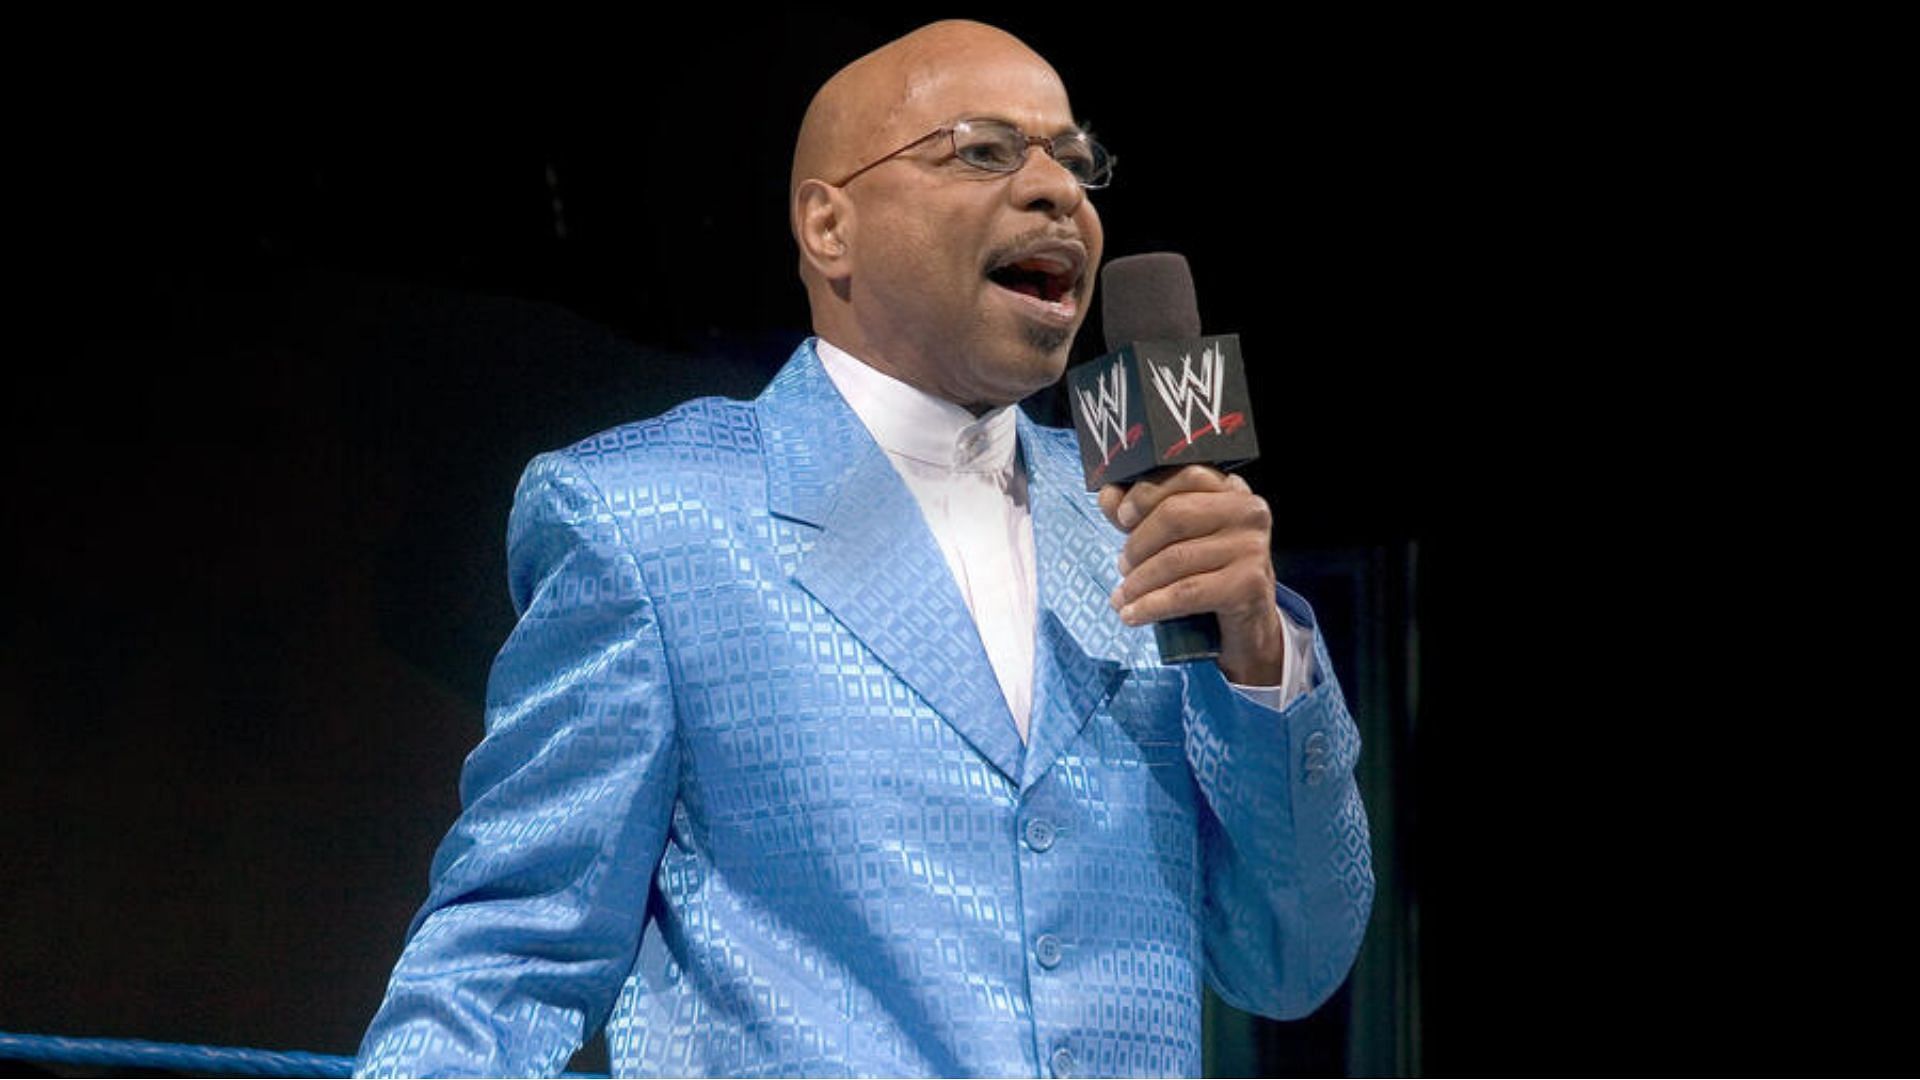 Teddy Long recently praised a current WWE Superstar